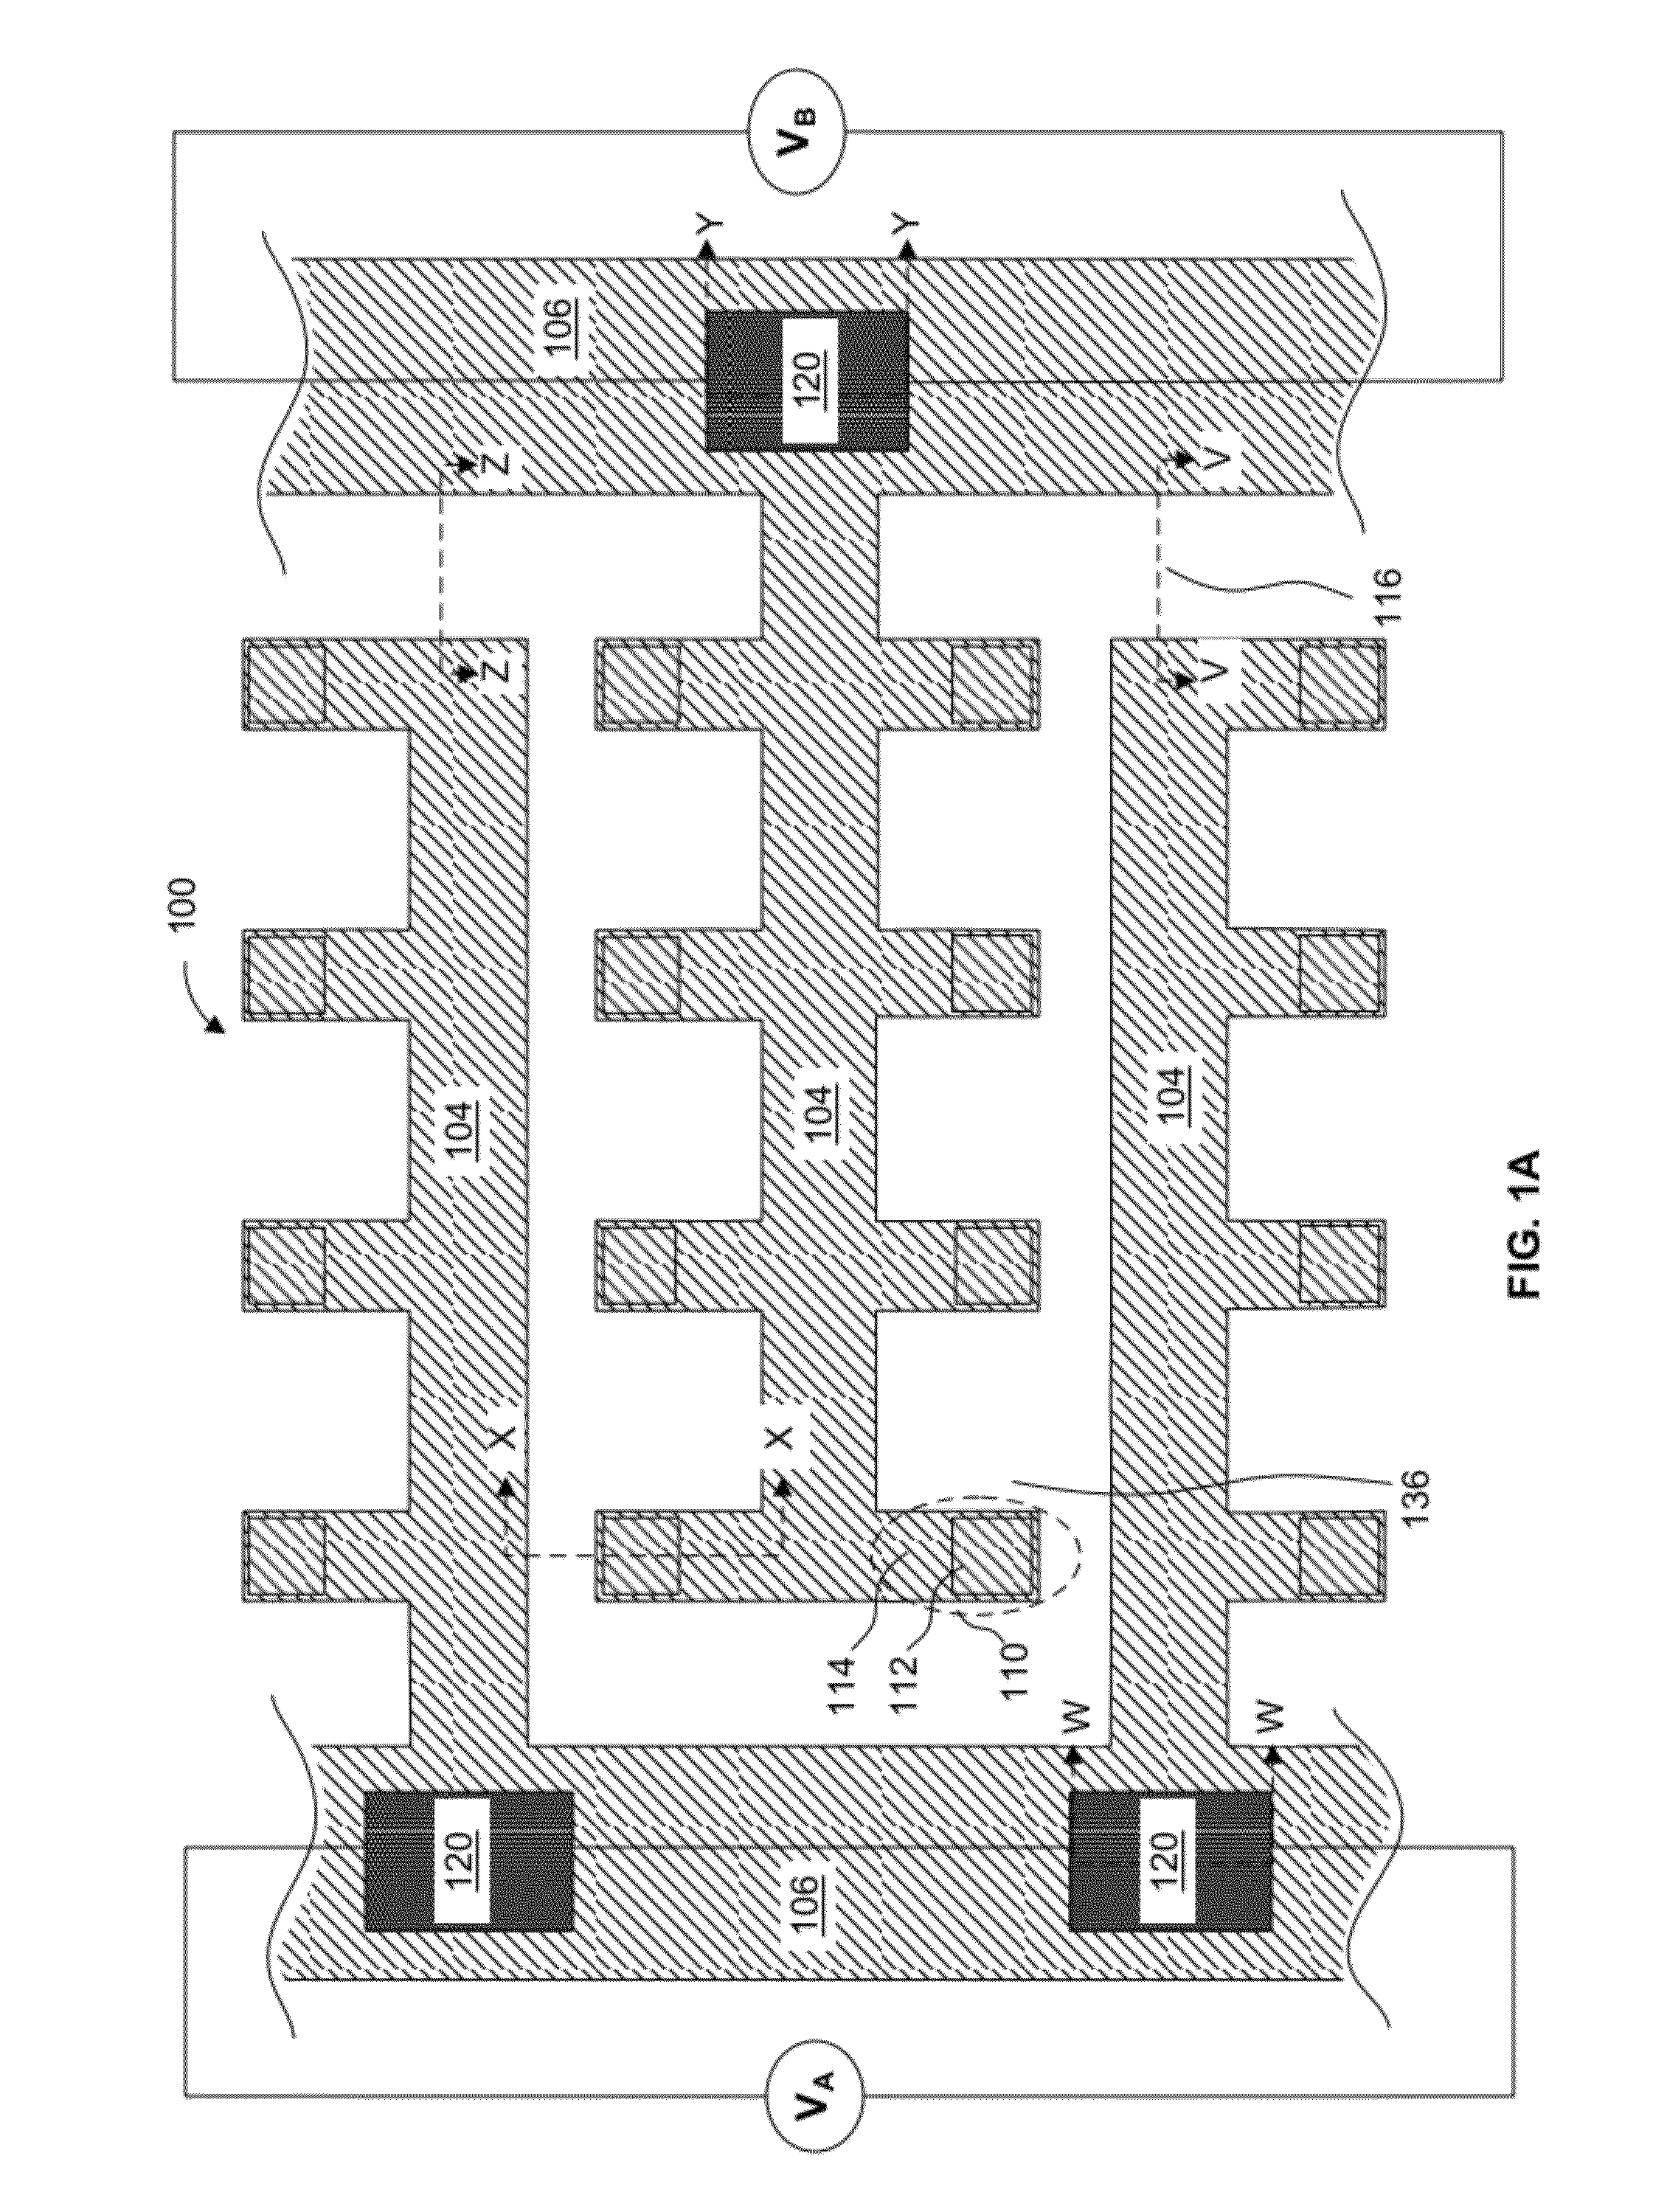 Method of forming a compliant monopolar micro device transfer head with silicon electrode